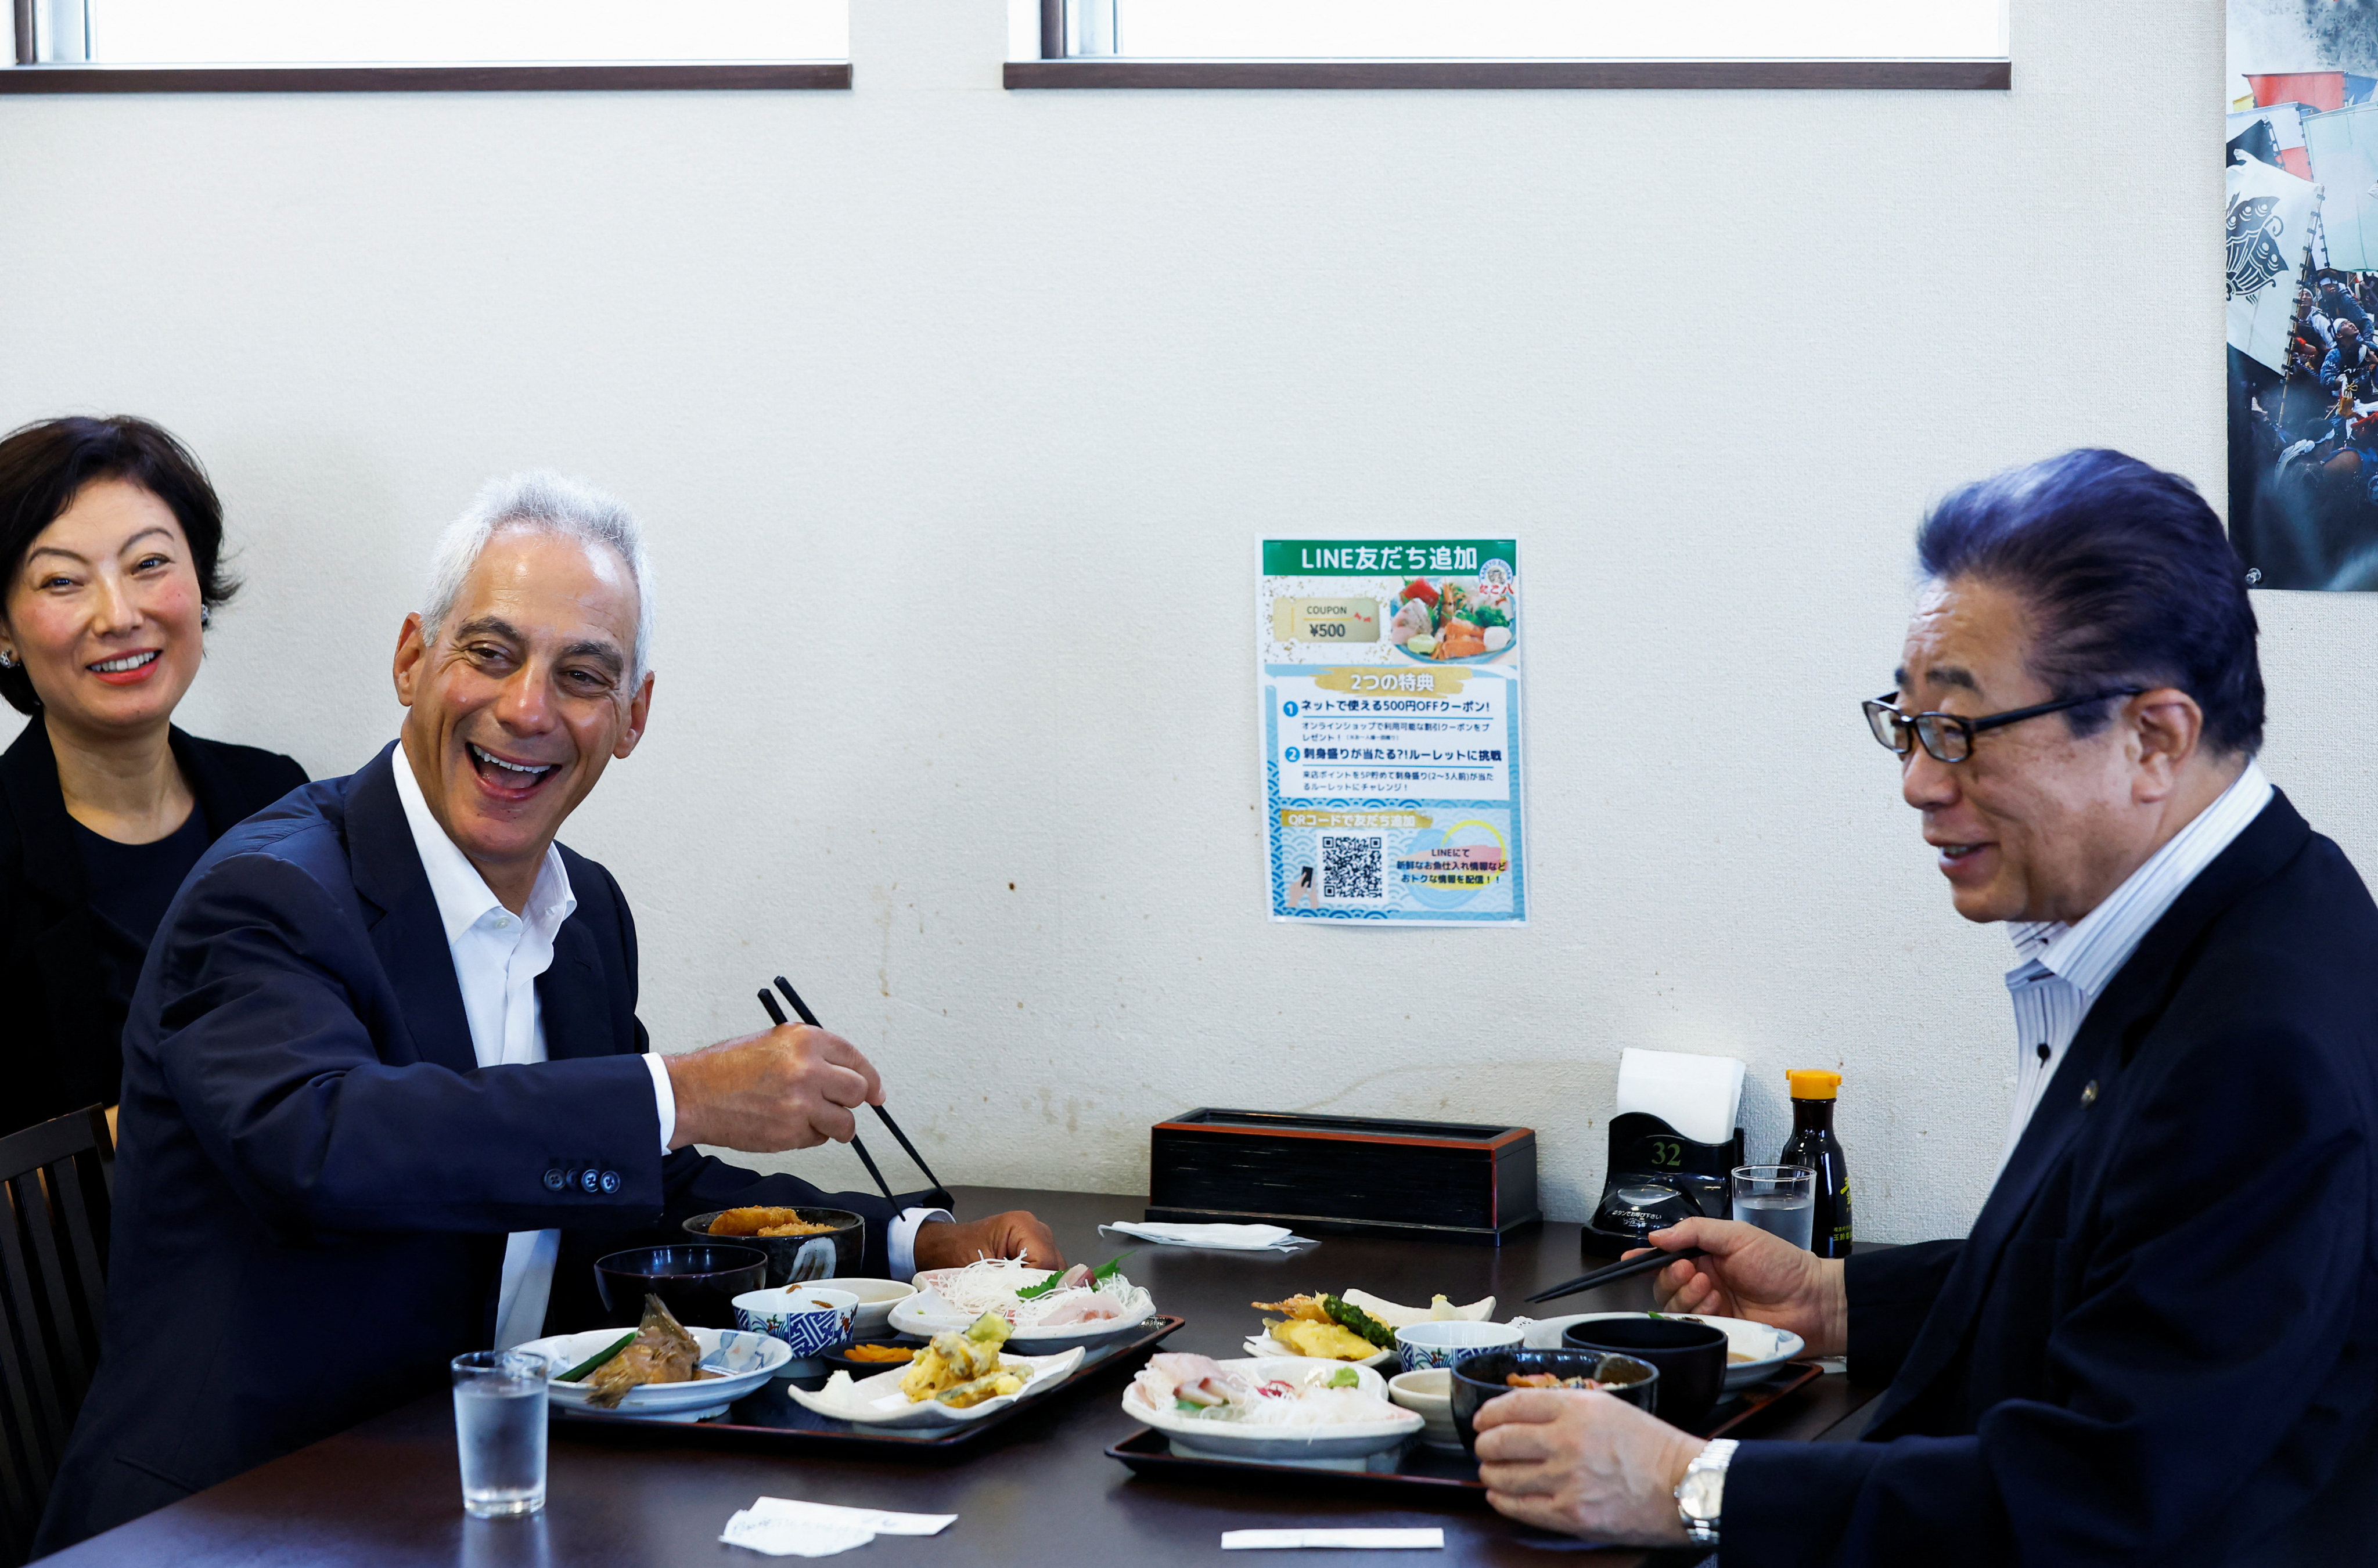 US Ambassador to Japan Rahm Emanuel eats lunch with Soma Mayor Hidekiyo Tachiya at Restaurant Takohachi during his visit to show his support for the water discharge from the Fukushima Daiichi nuclear power plant, in Soma, Fukushima Prefecture, Japan on August 31, 2023. Photo: Reuters